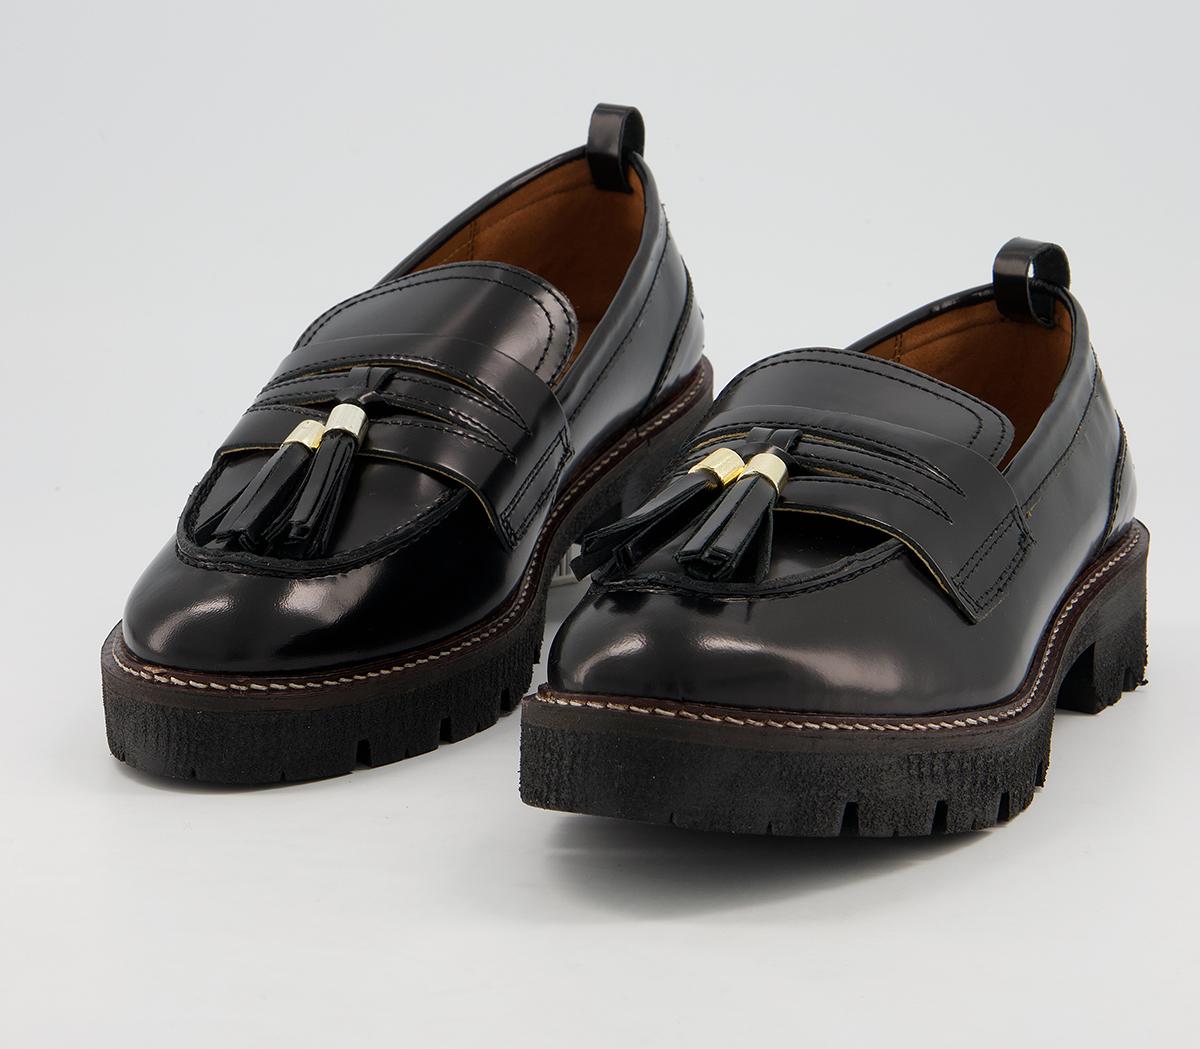 OFFICE Fundamental Cleated Tassel Loafer Shoes Black Leather - Flat ...